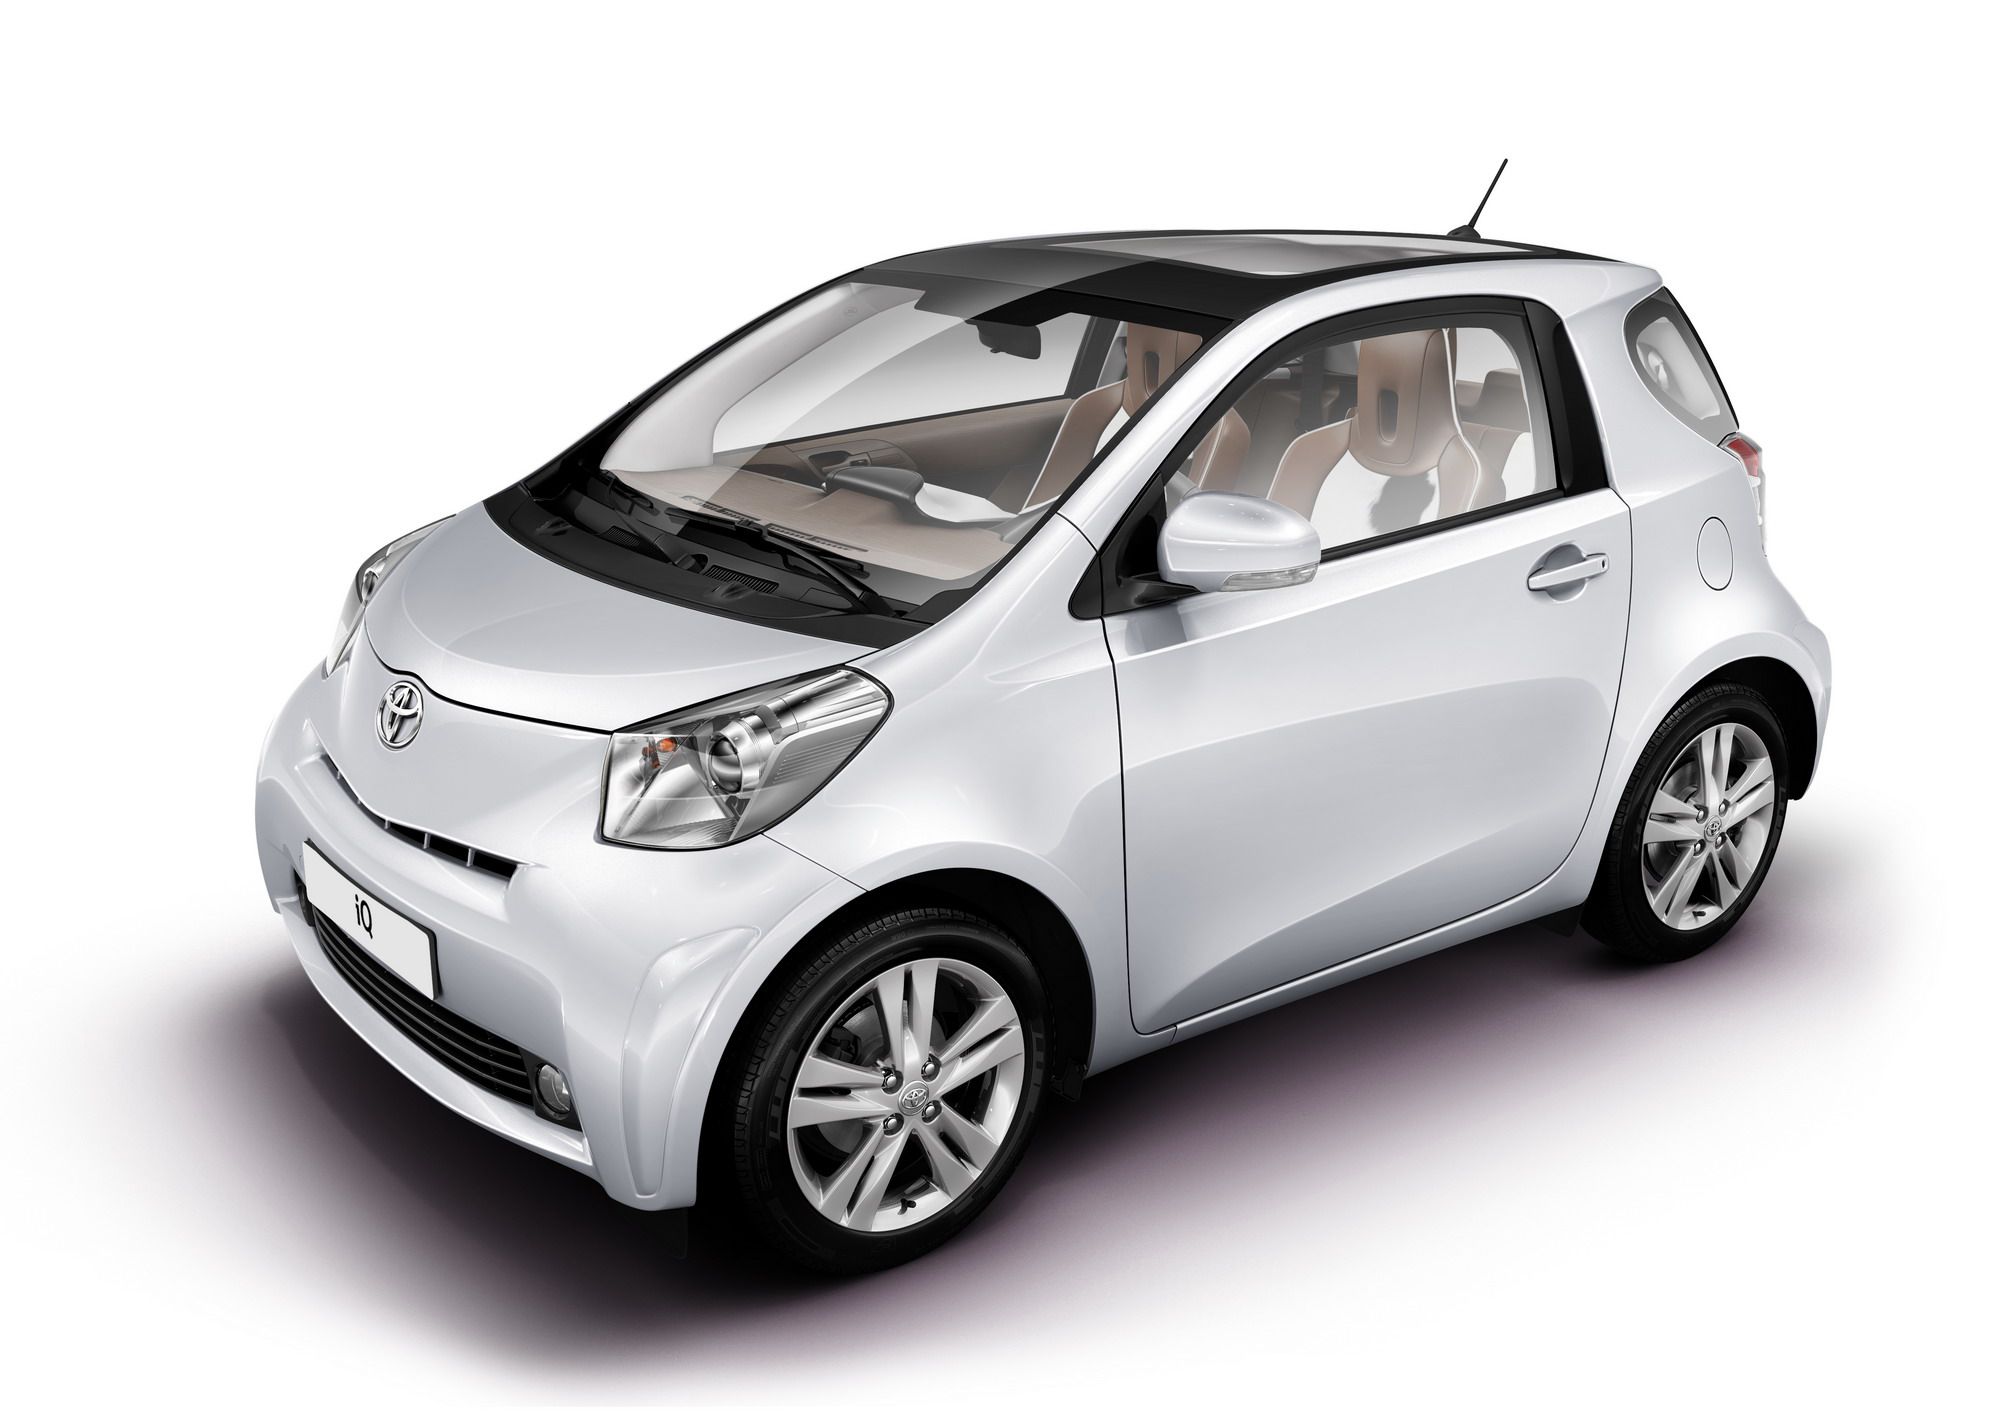 2009 Toyota iQ for Sports and iQ Collection